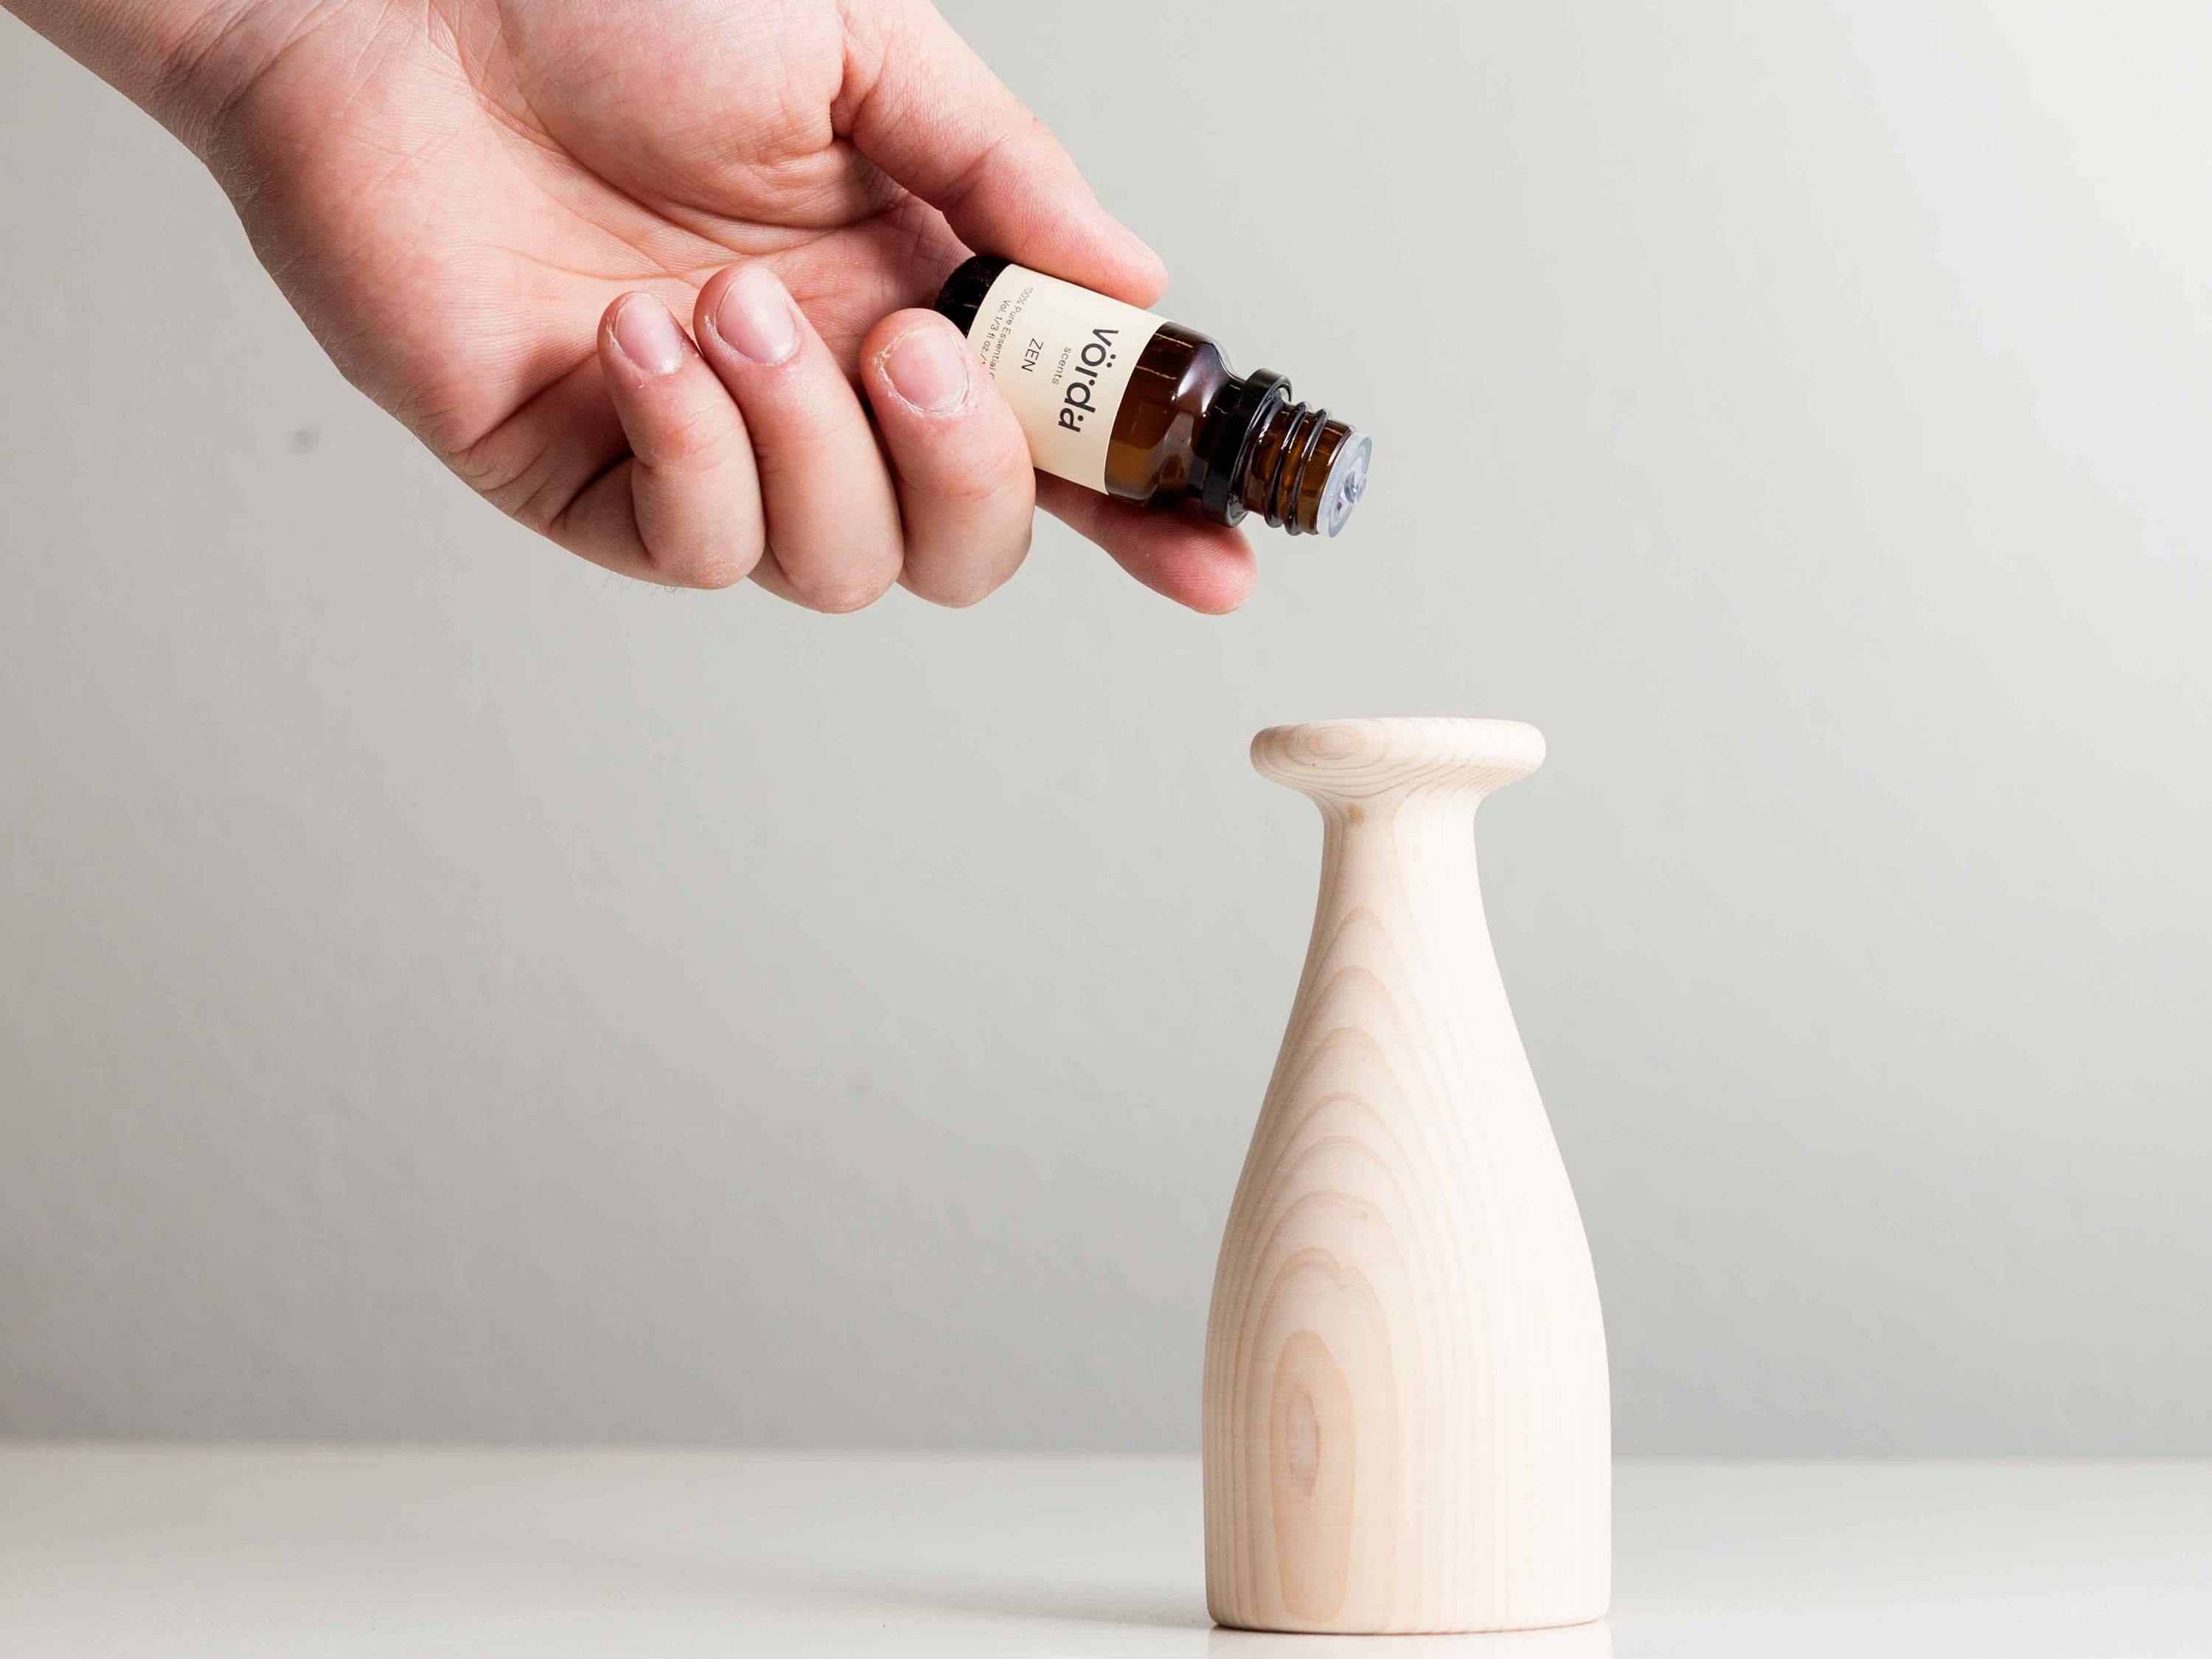 How to use a diffuser for your Essential Oils - YouTube